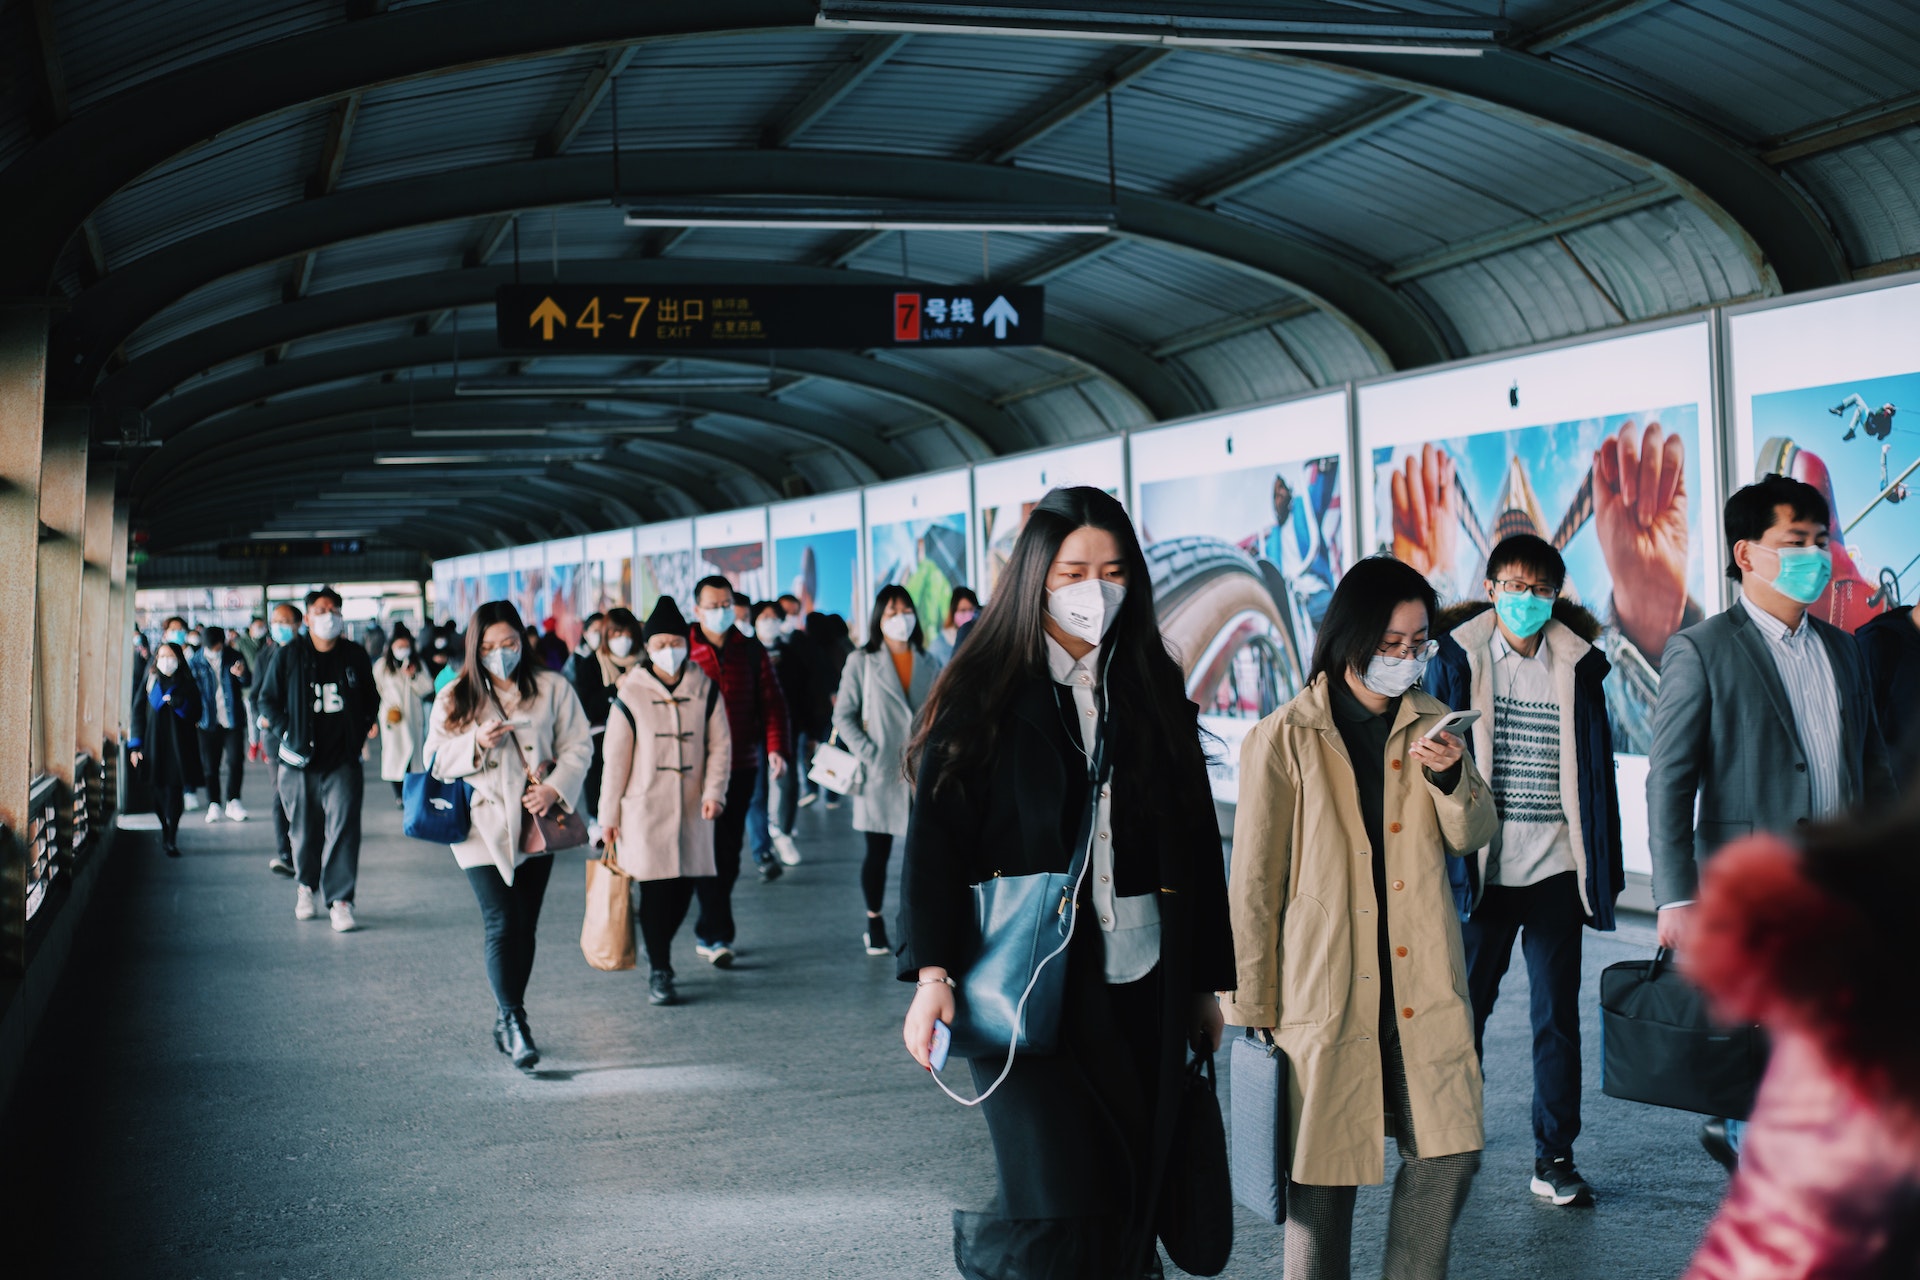 People wearing face masks at a train station